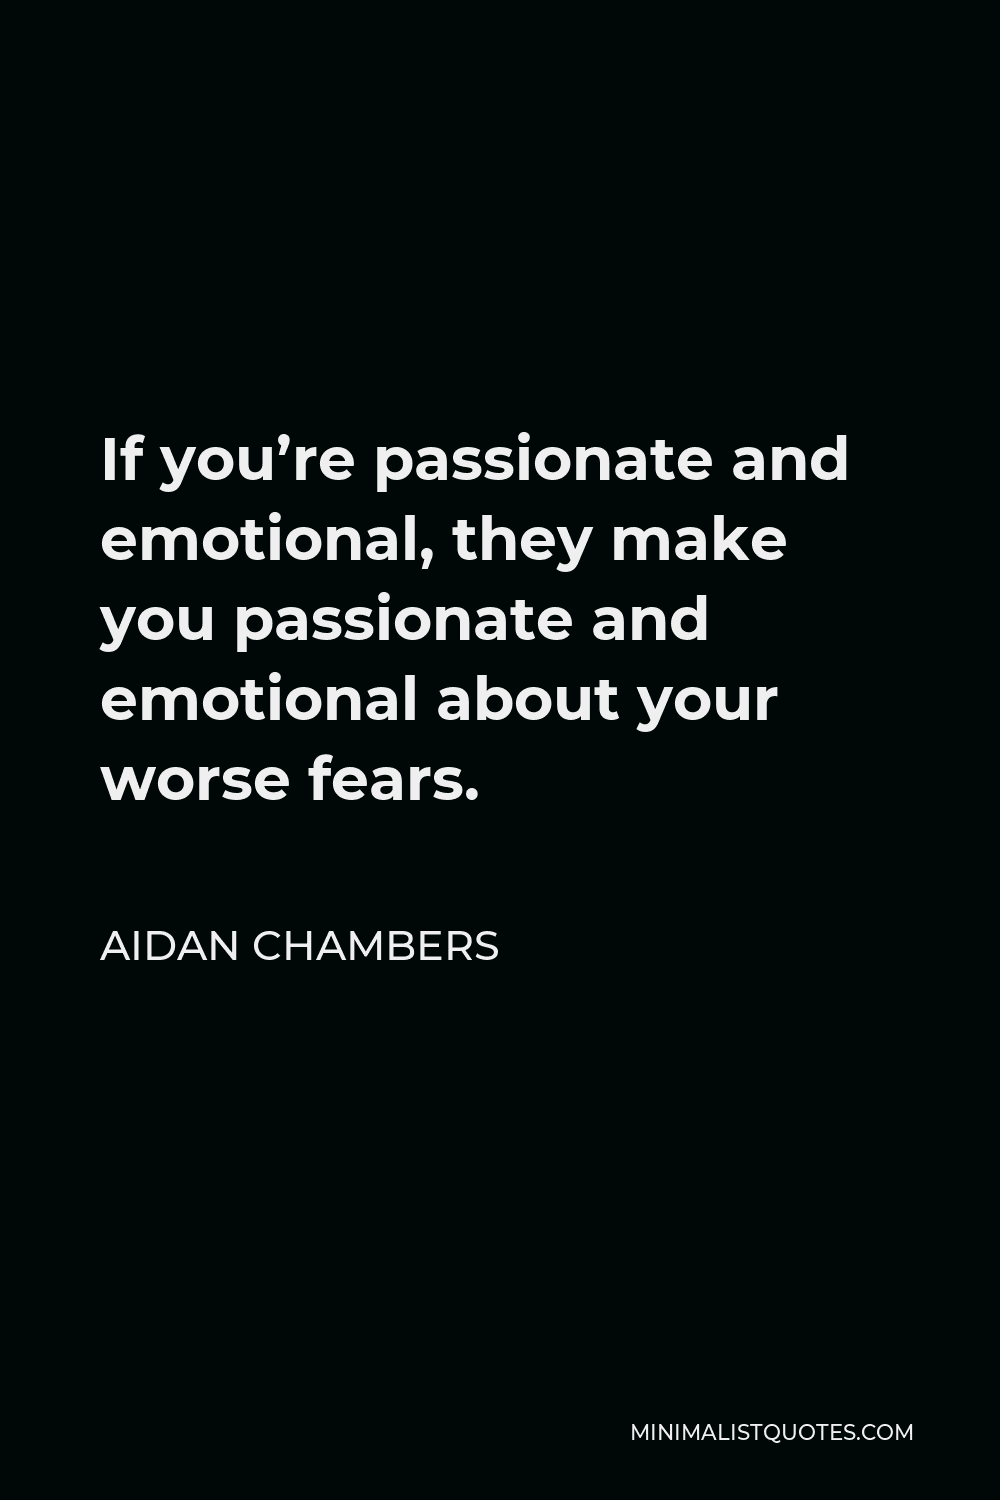 Aidan Chambers Quote - If you’re passionate and emotional, they make you passionate and emotional about your worse fears.